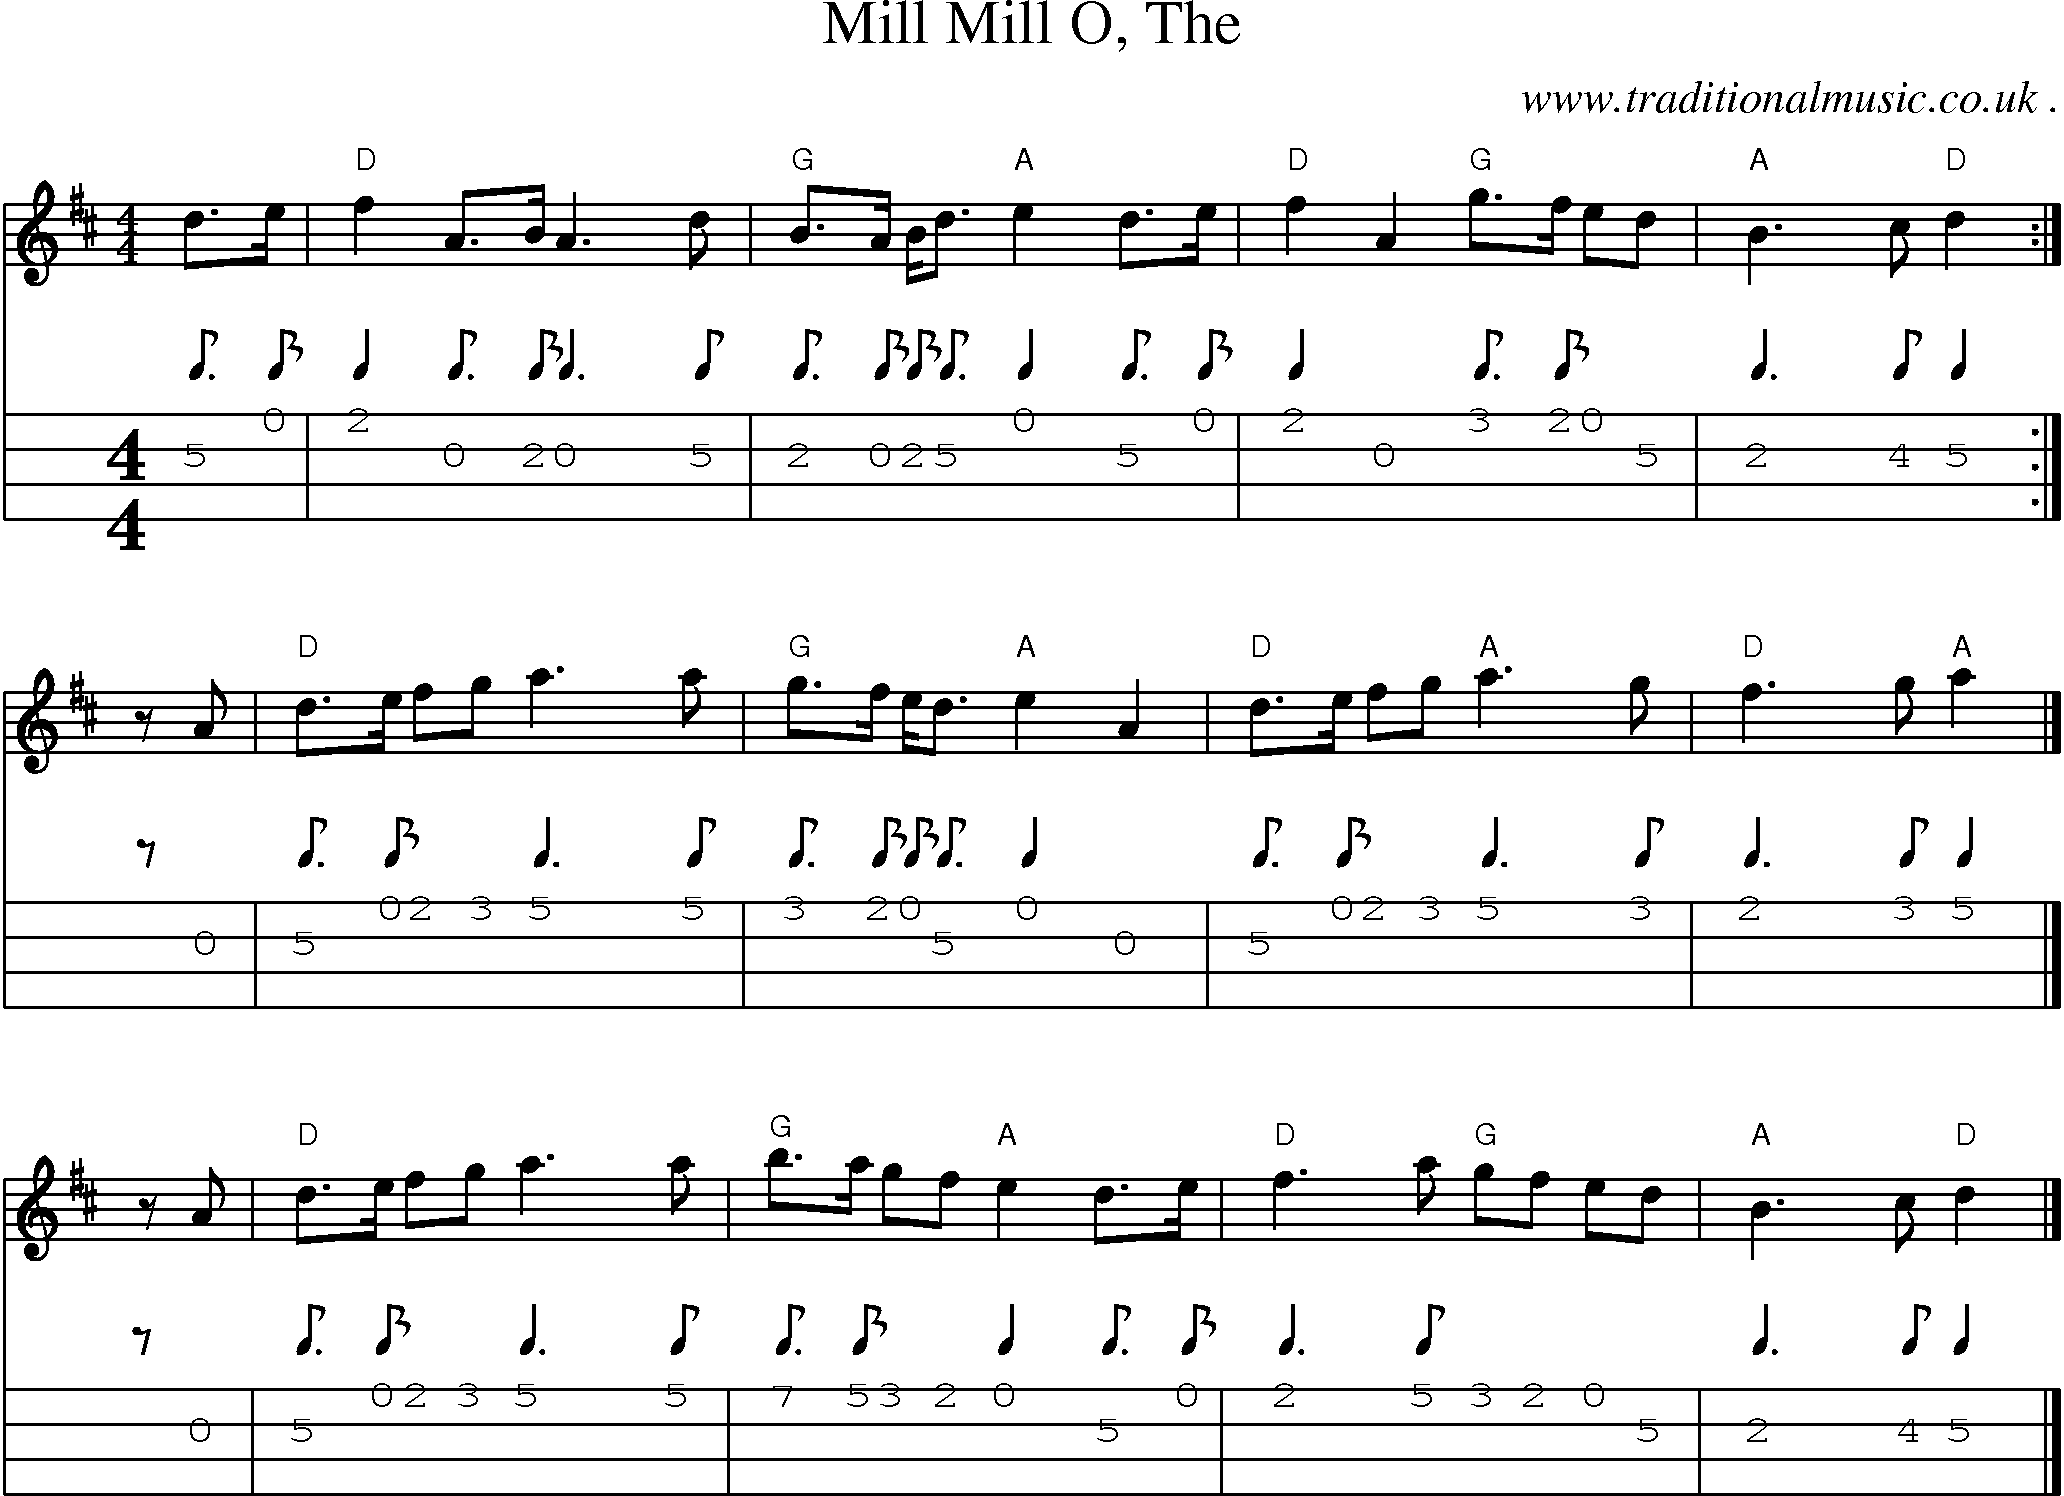 Sheet-music  score, Chords and Mandolin Tabs for Mill Mill O The